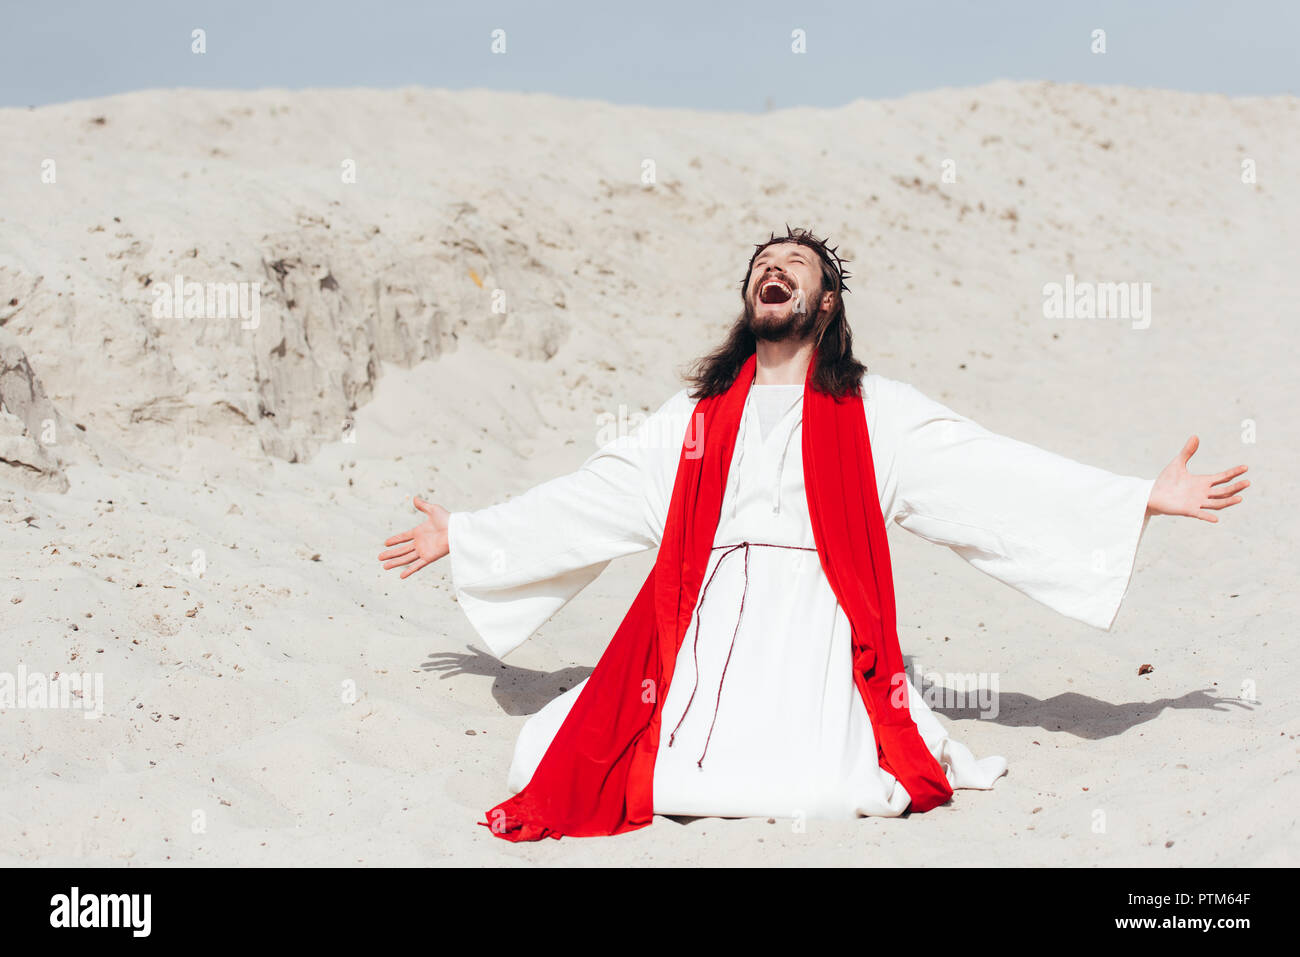 laughing Jesus in robe, red sash and crown of thorns standing on knees with open arms in desert Stock Photo